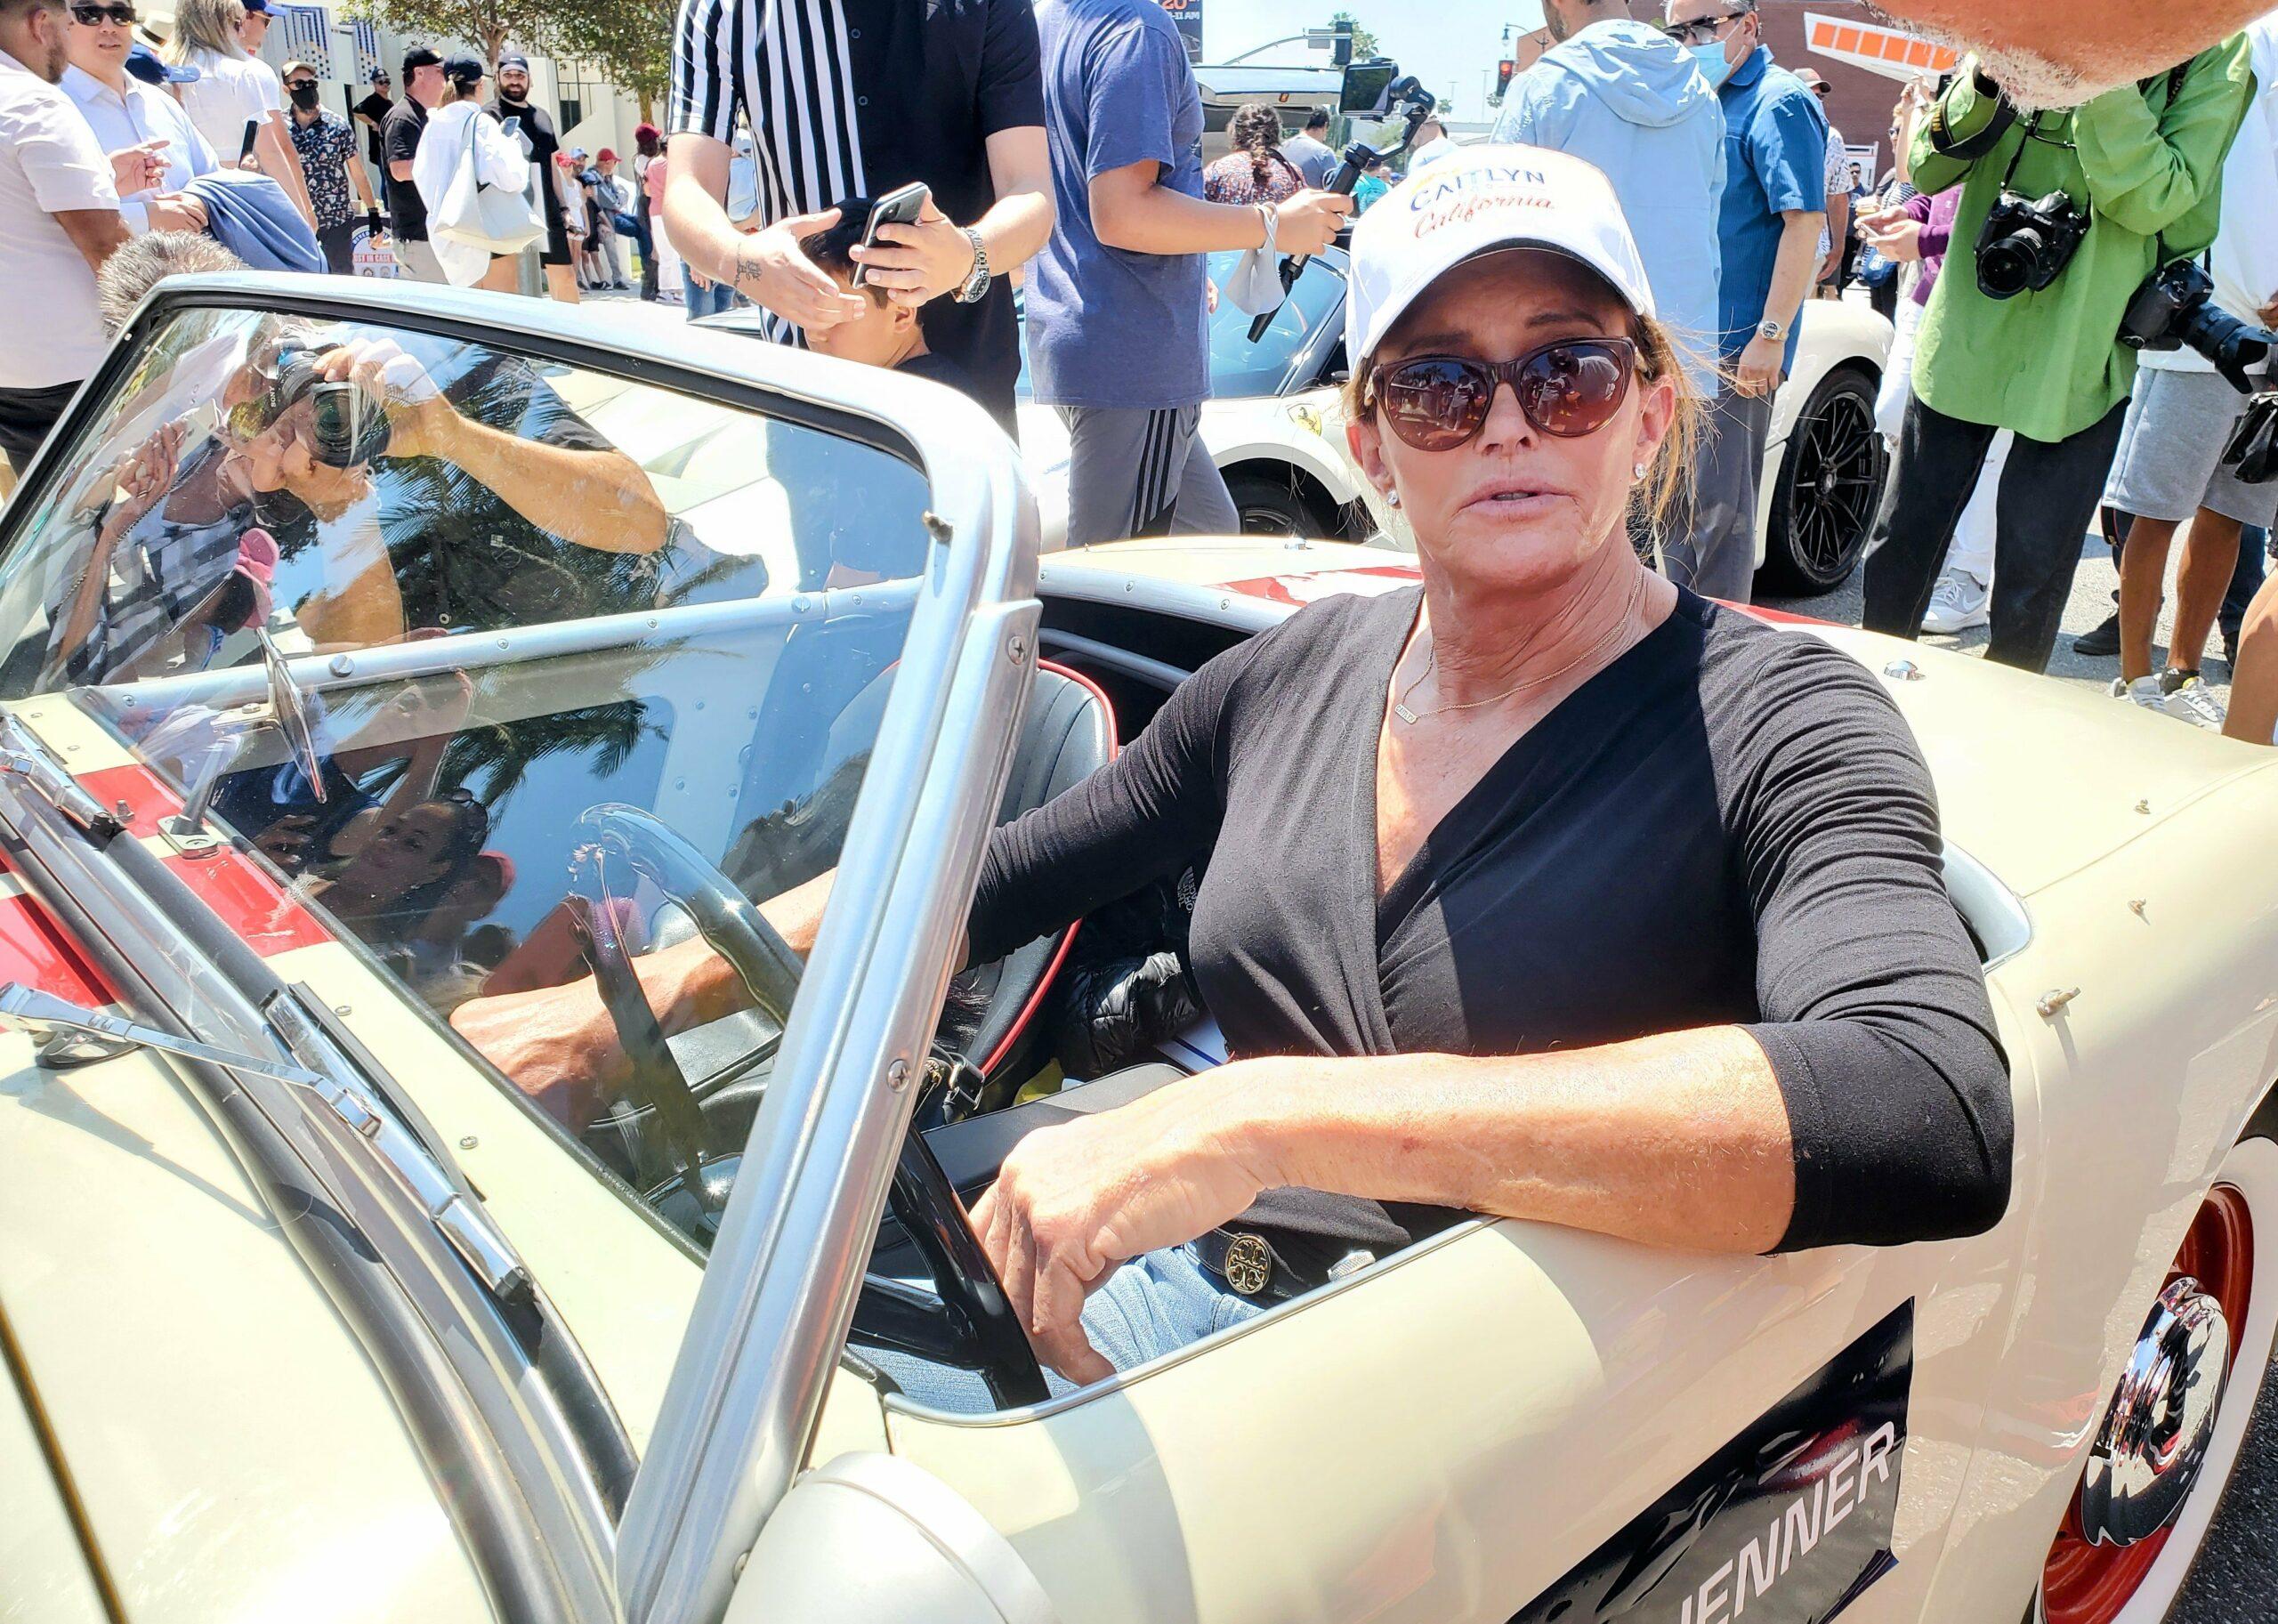 Caitlyn Jenner seen sporting campaign hat during Father's Day classic car event